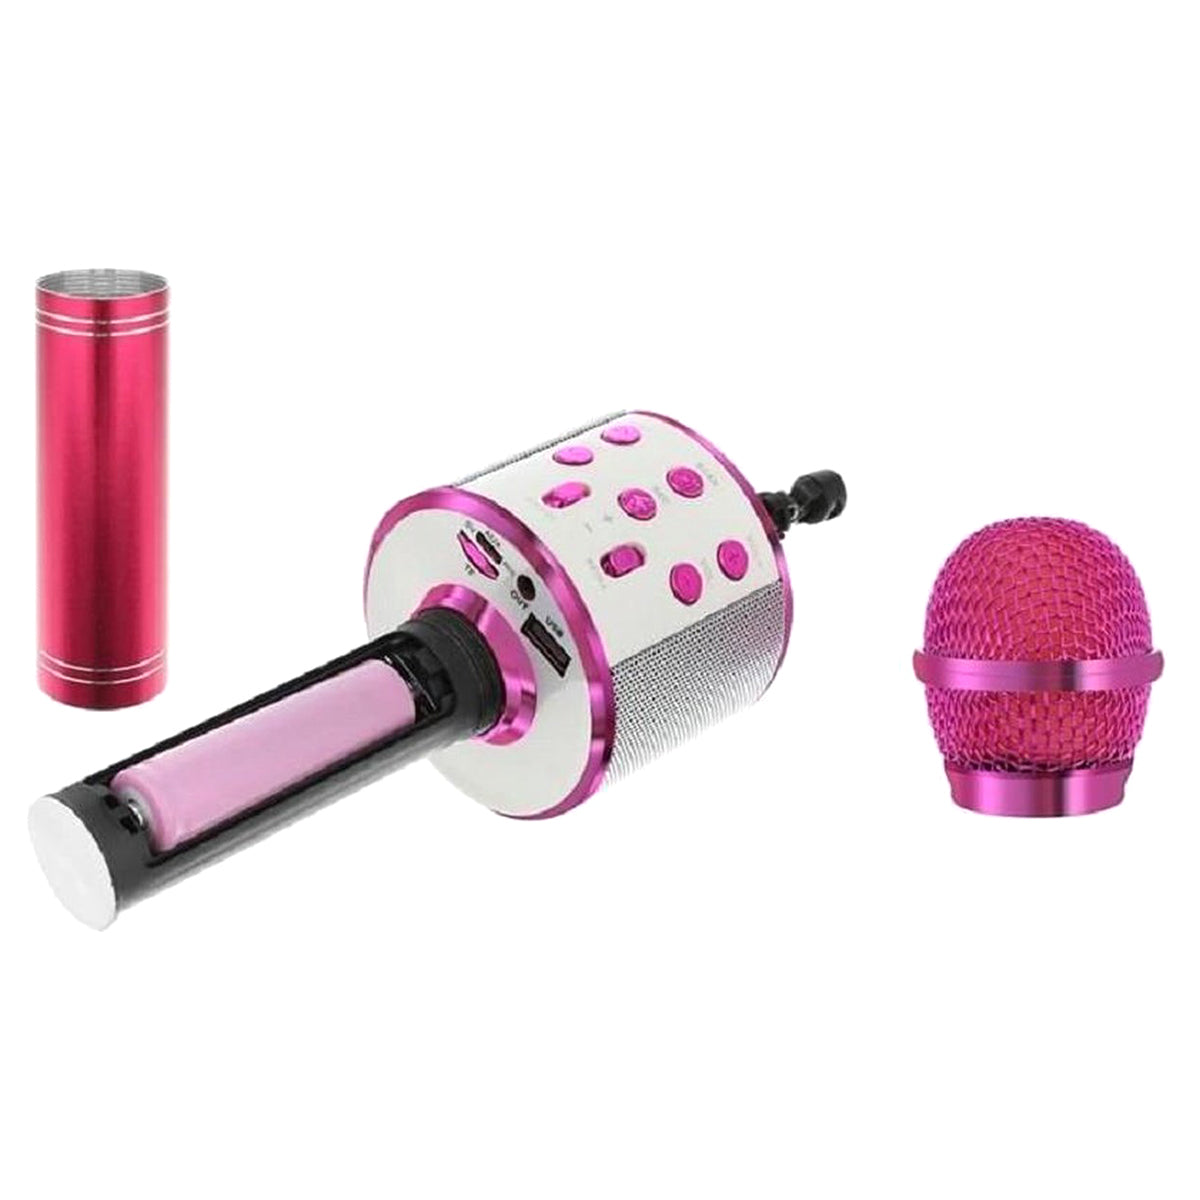 Wireless Karaoke Microphone with Speaker and Bluetooth - Pink